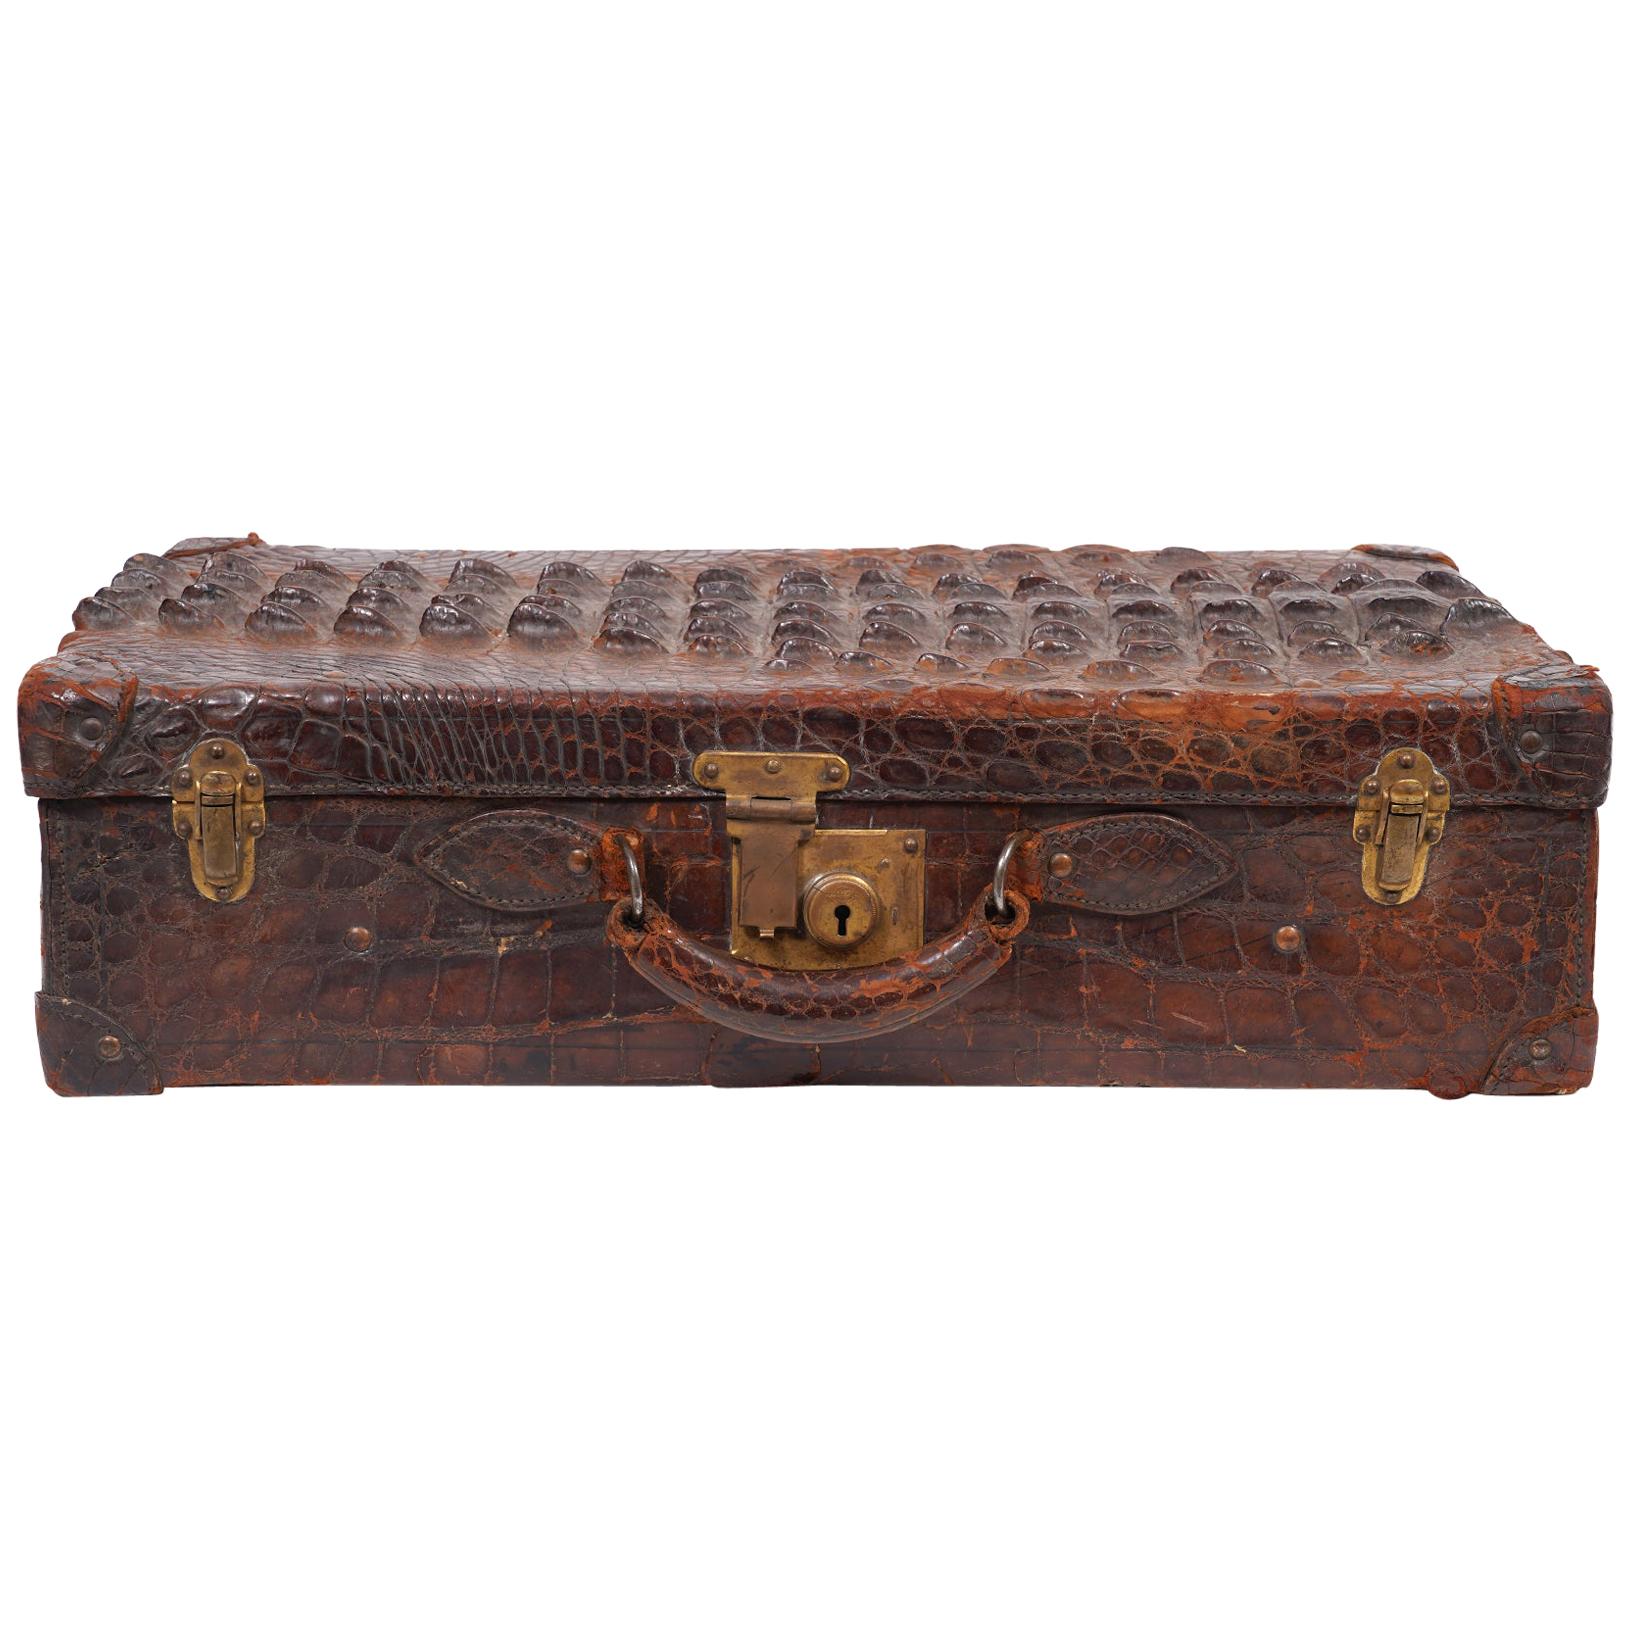 Exotic Early Horn Back Alligator or Crocodile Small Suitcase or Briefcase